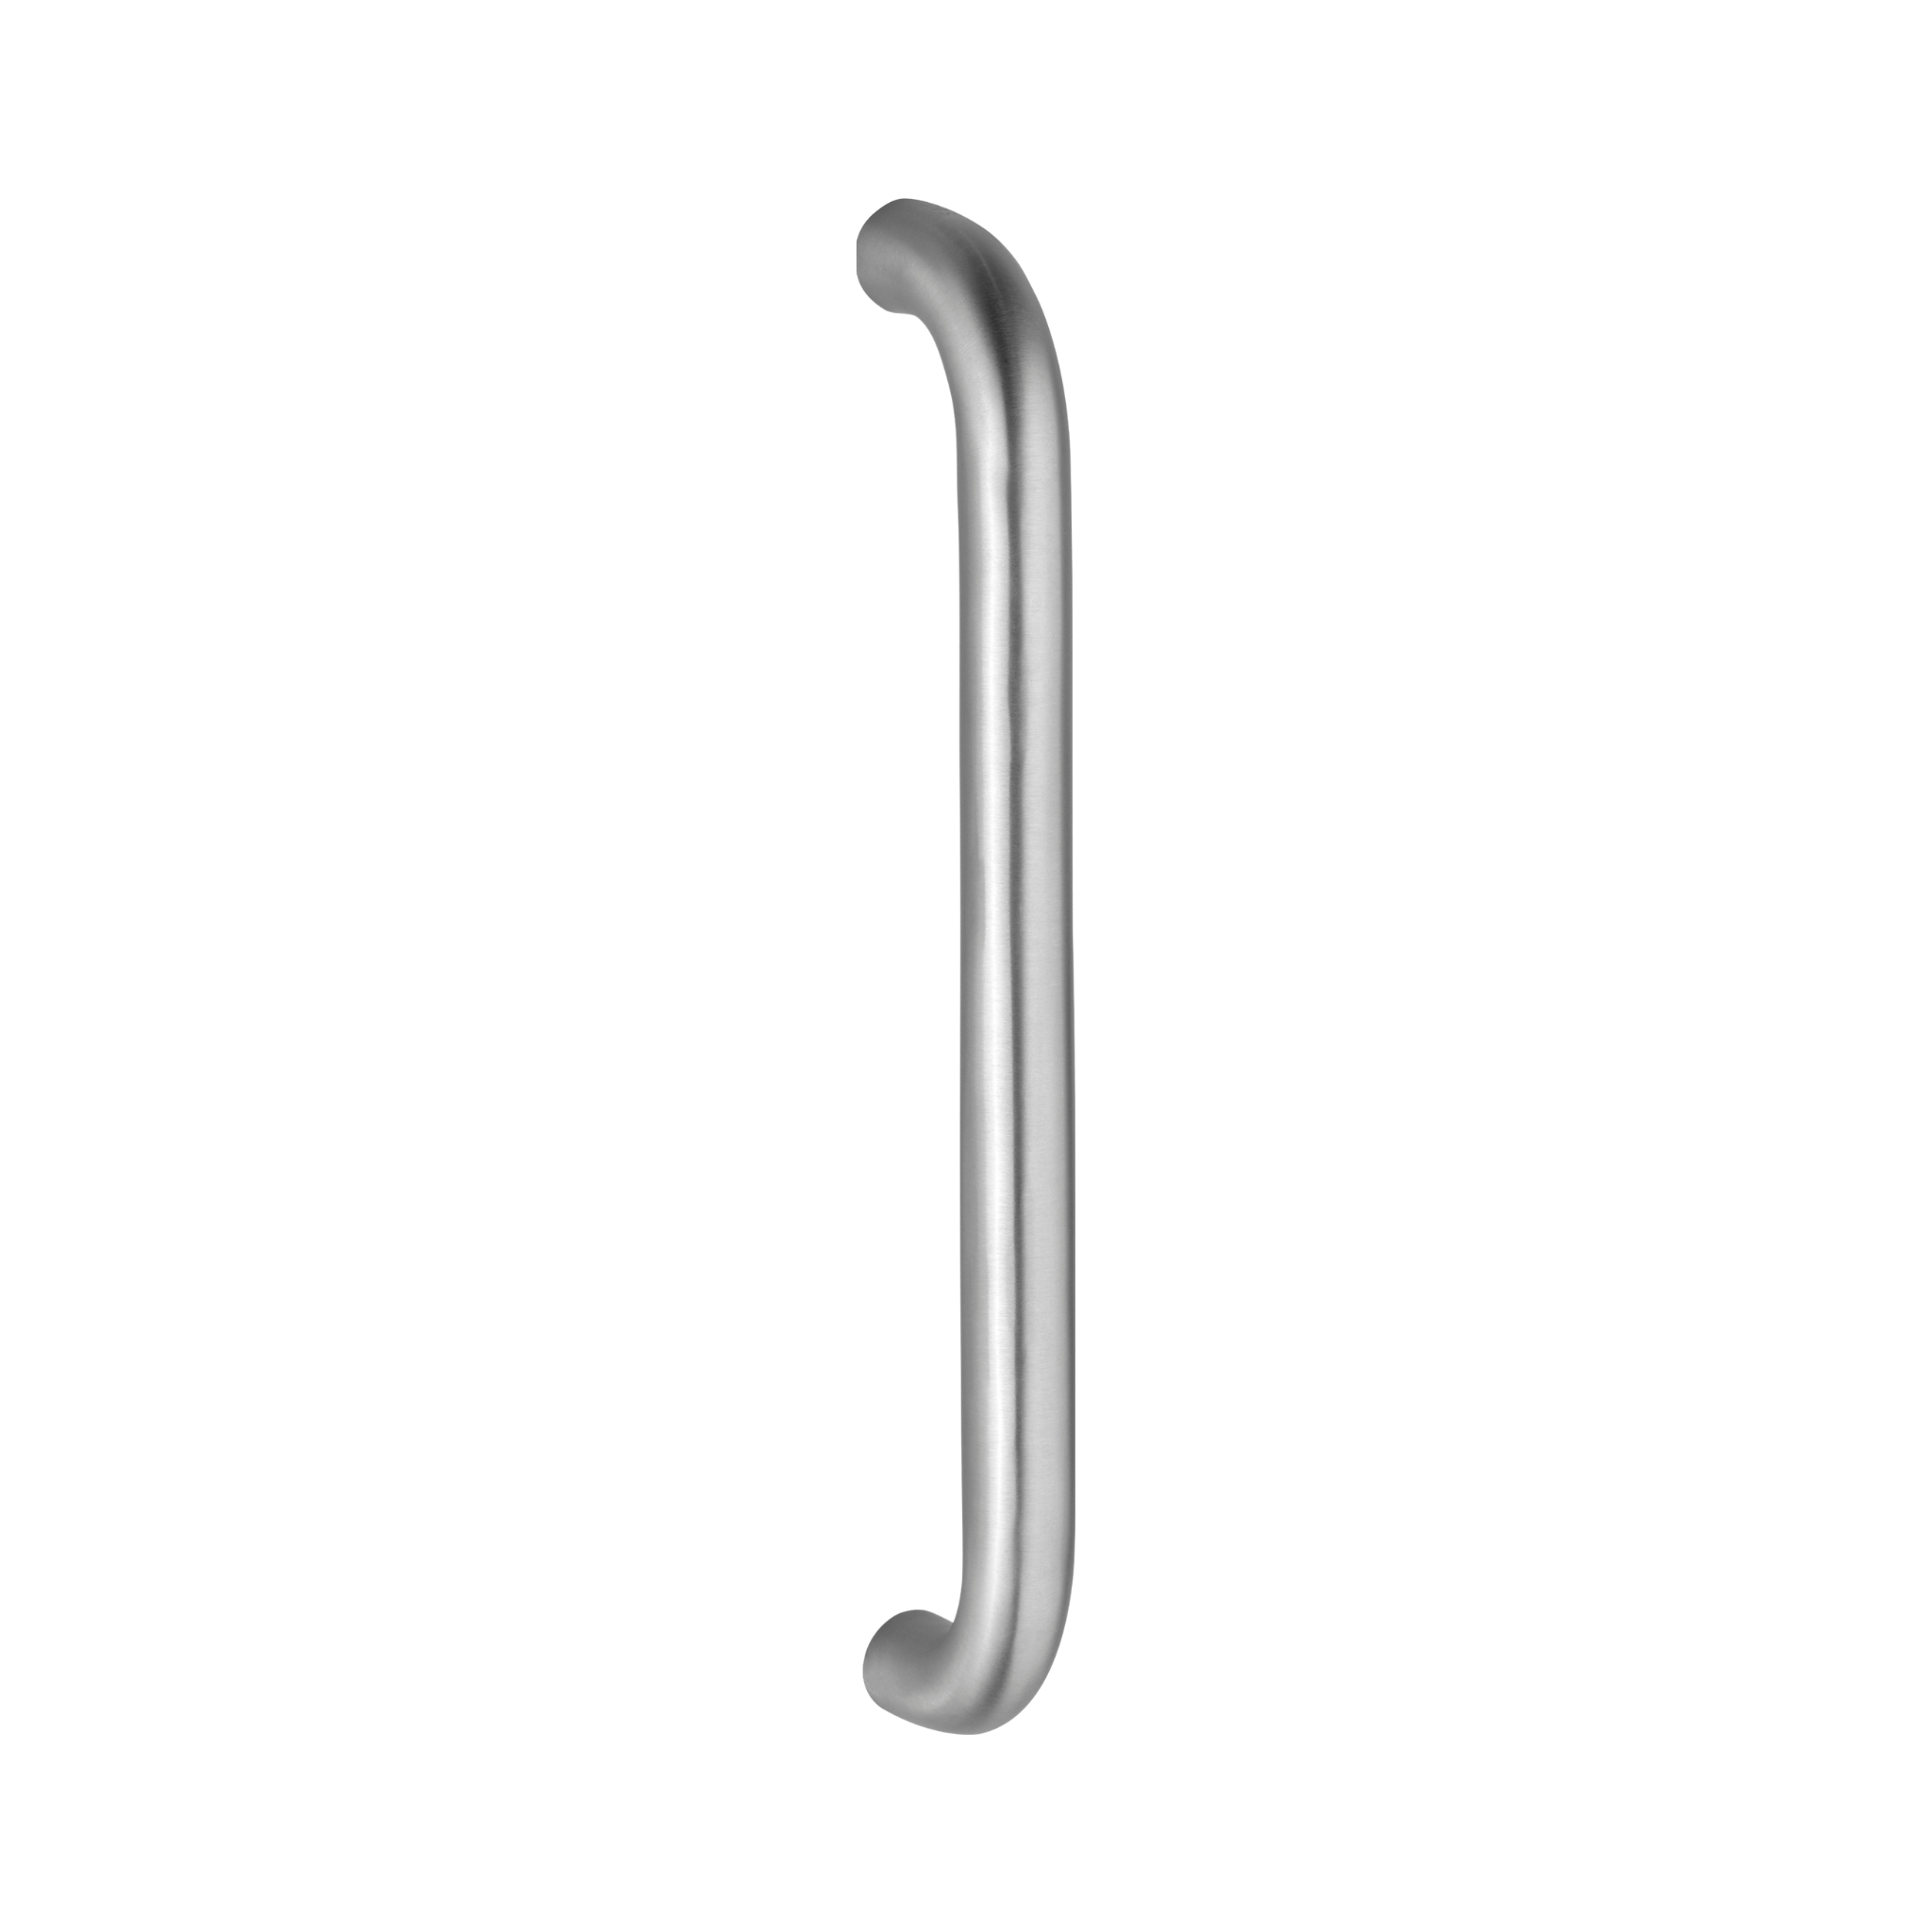 FP.D08.BB.TR, Pull Handle, Tubular, D Handle, BTB, 22mm (Ø) x 300mm (l) x 278mm (ctc), Stainless Steel with Tarnish Resistant, CISA